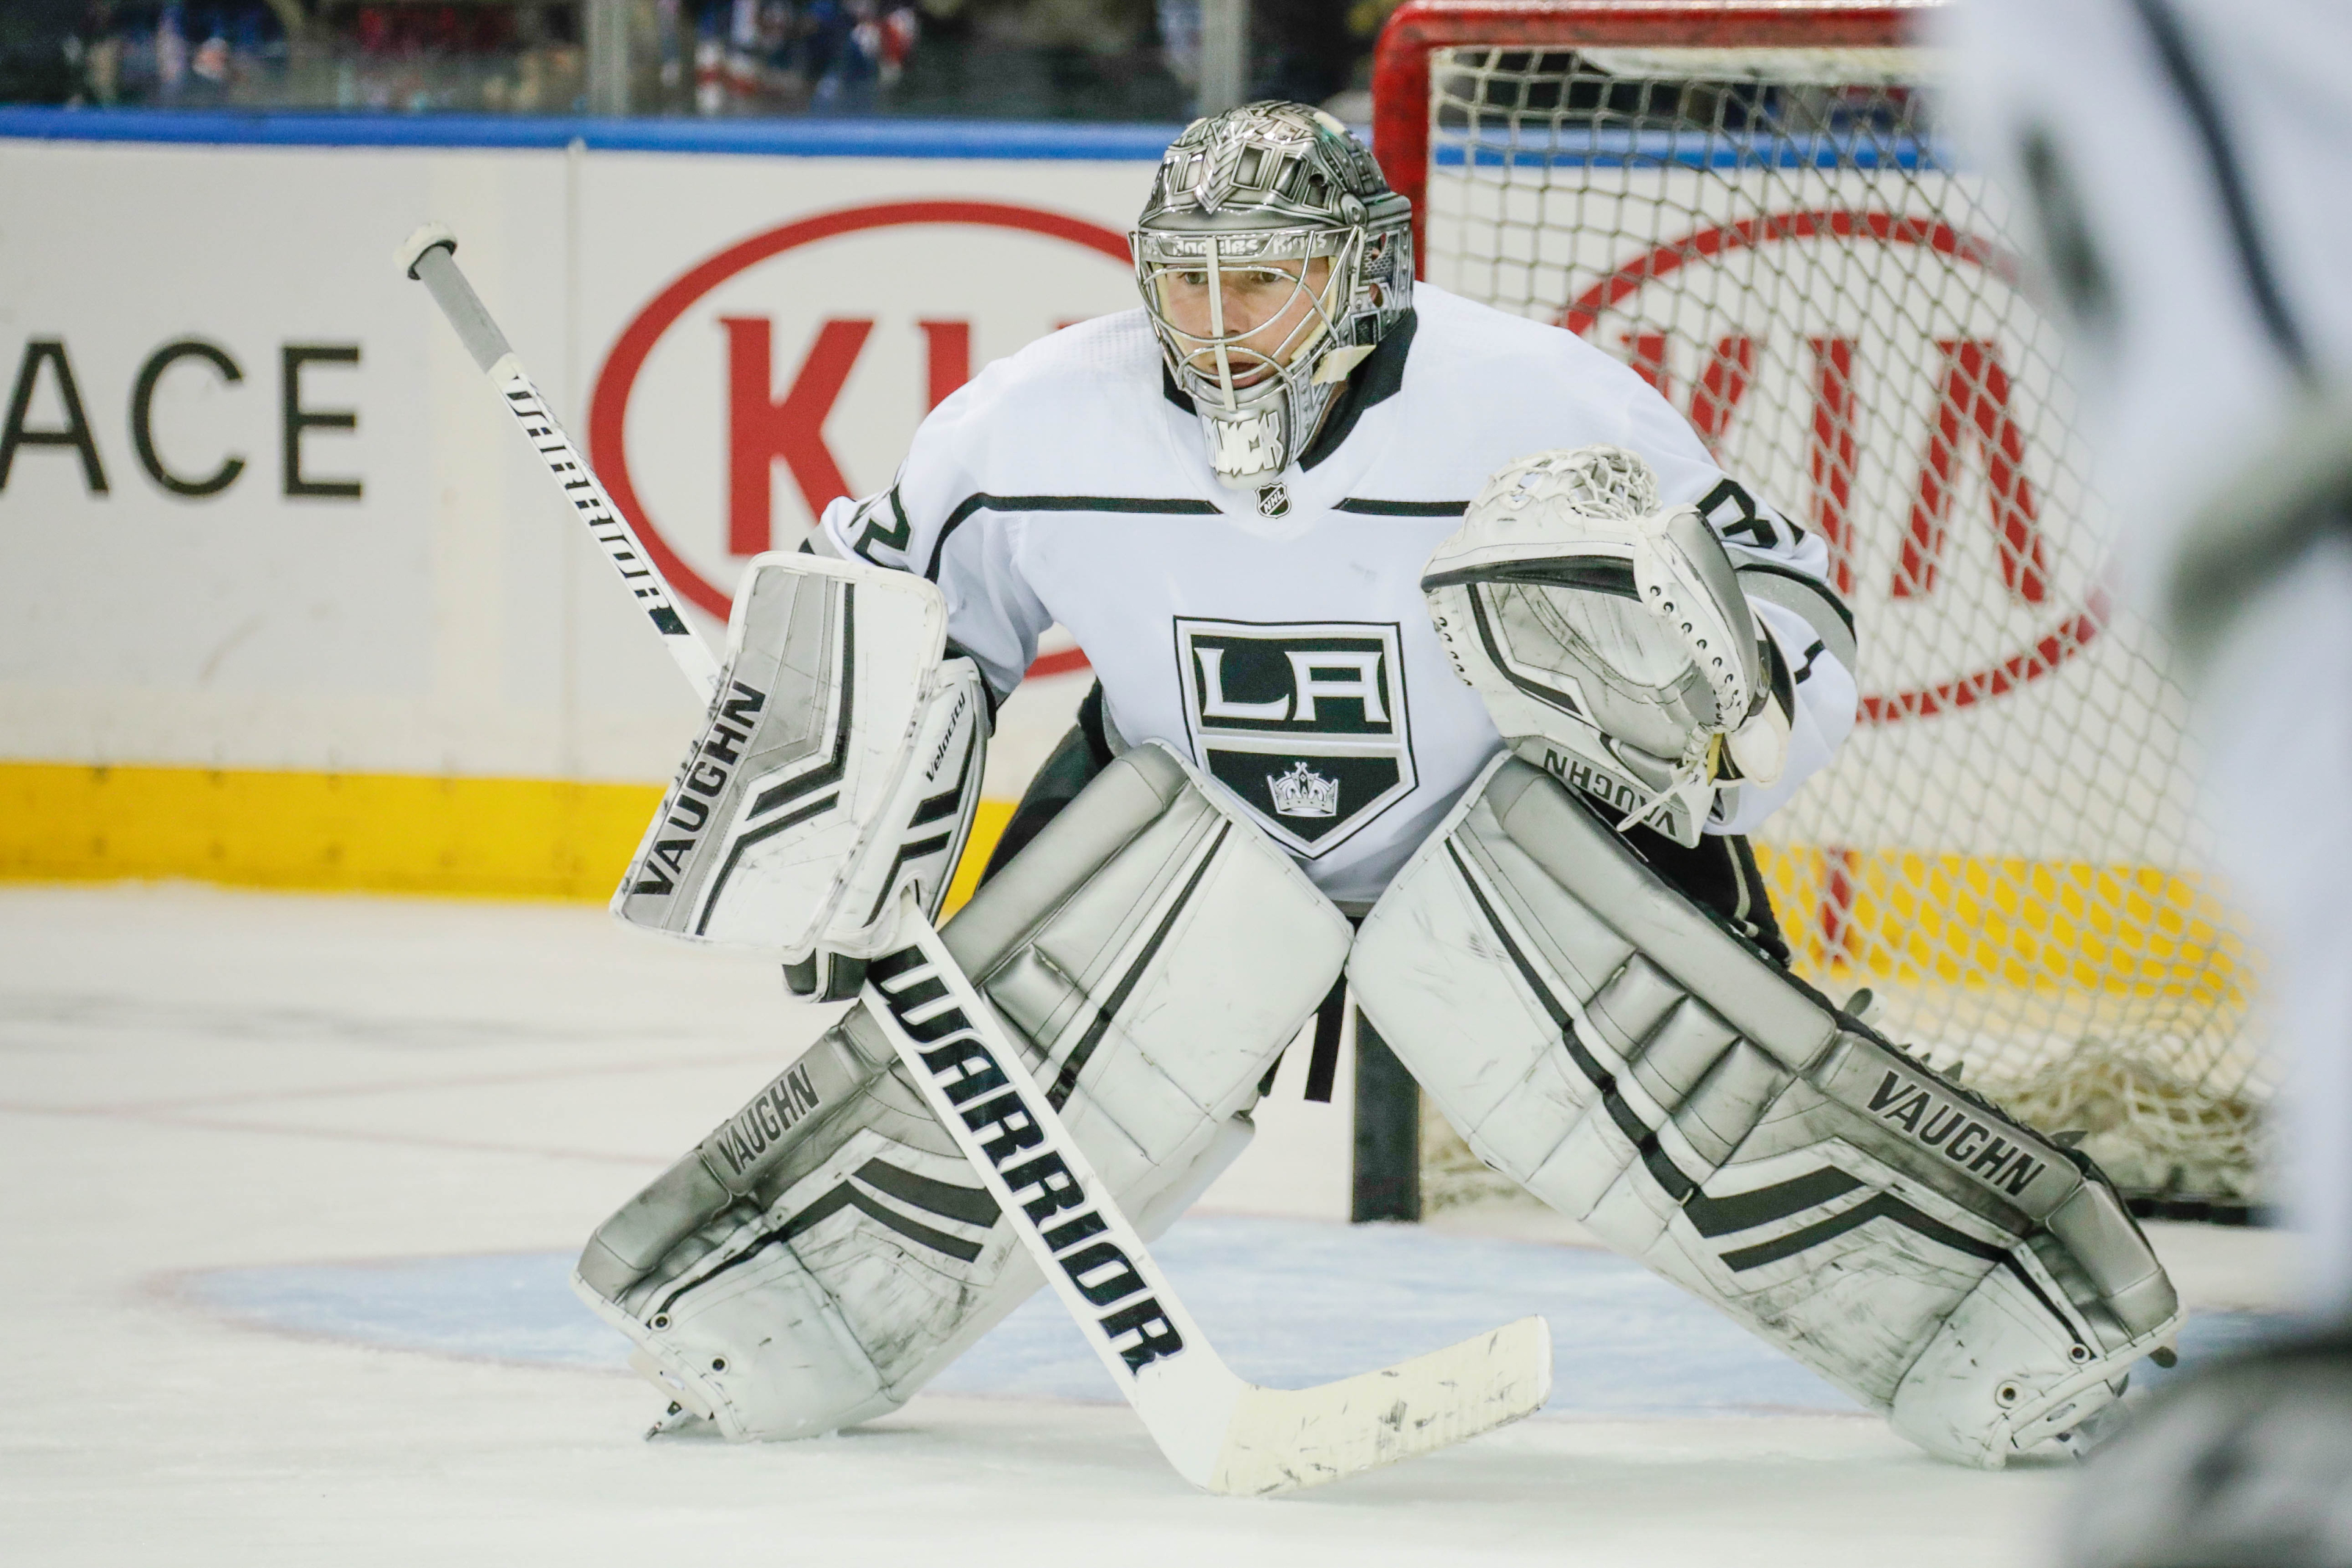 Jon Quick To Start For L.A. Kings Against Columbus Blue Jackets